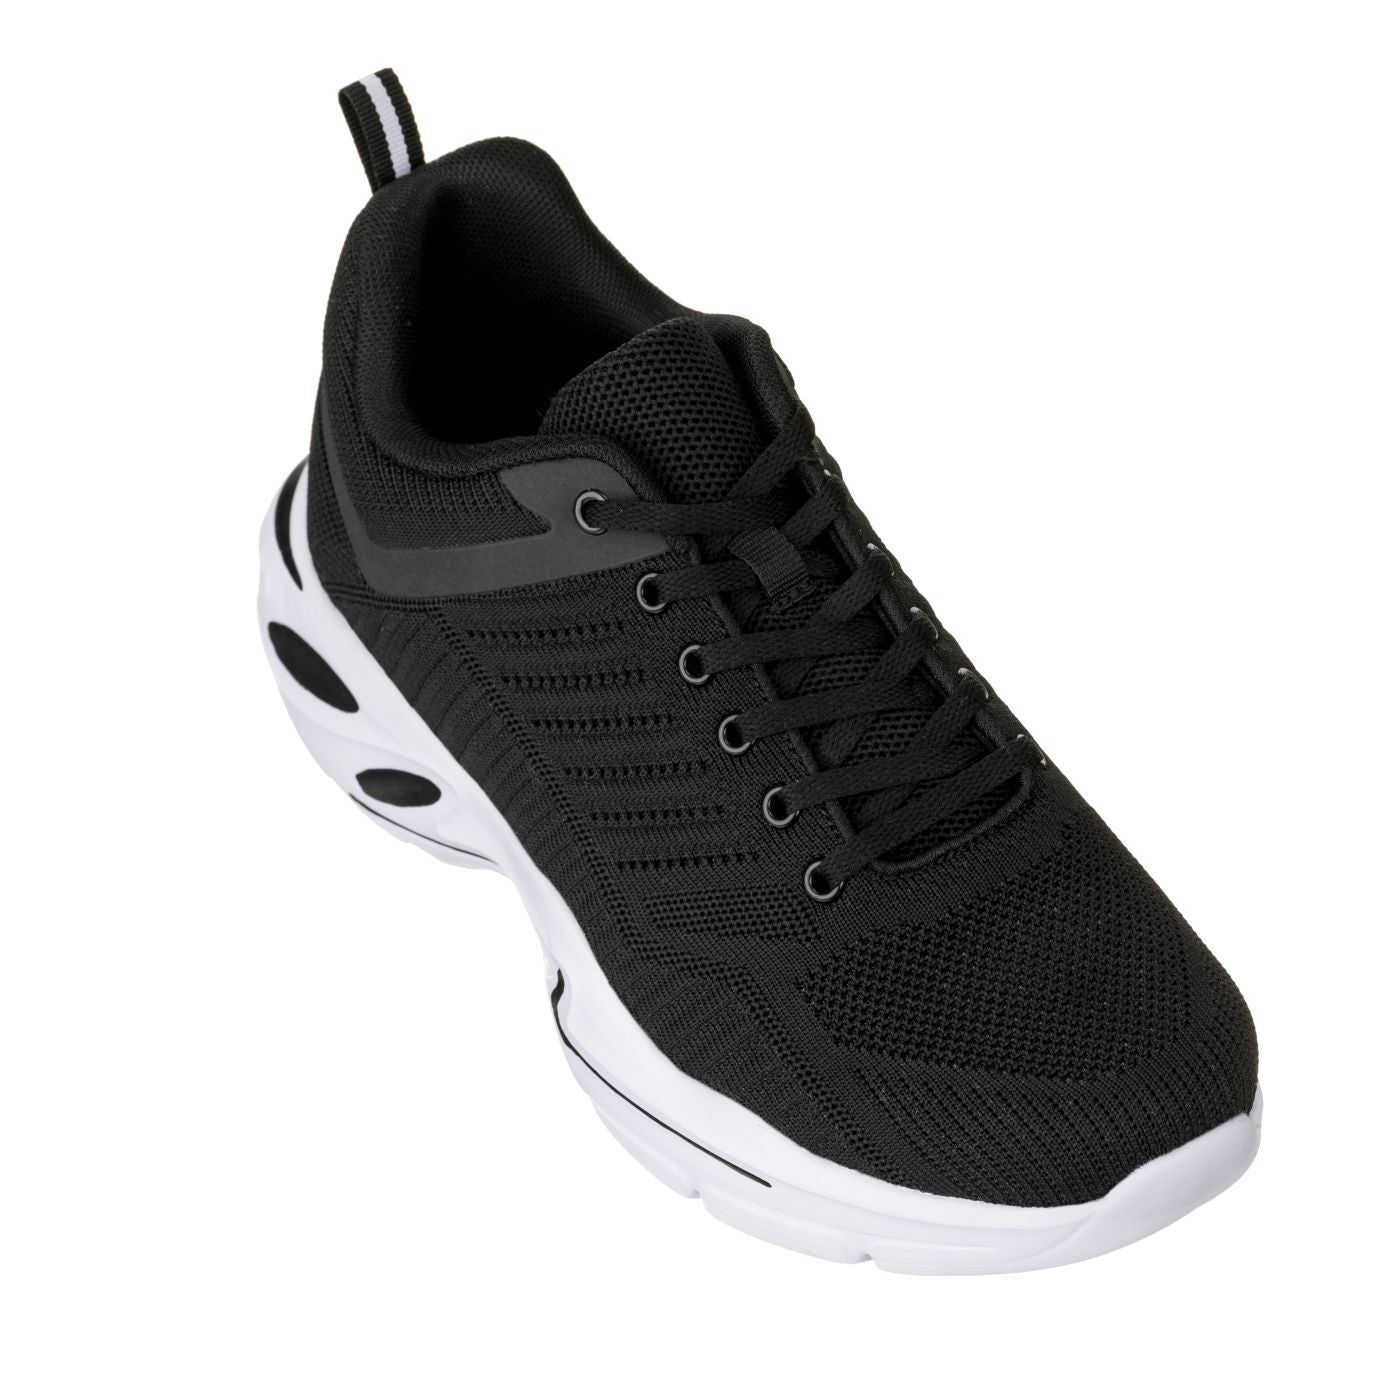 Elevator shoes height increase CALTO - Q330 - 2.6 Inches Taller (Black/White) - Super Lightweight